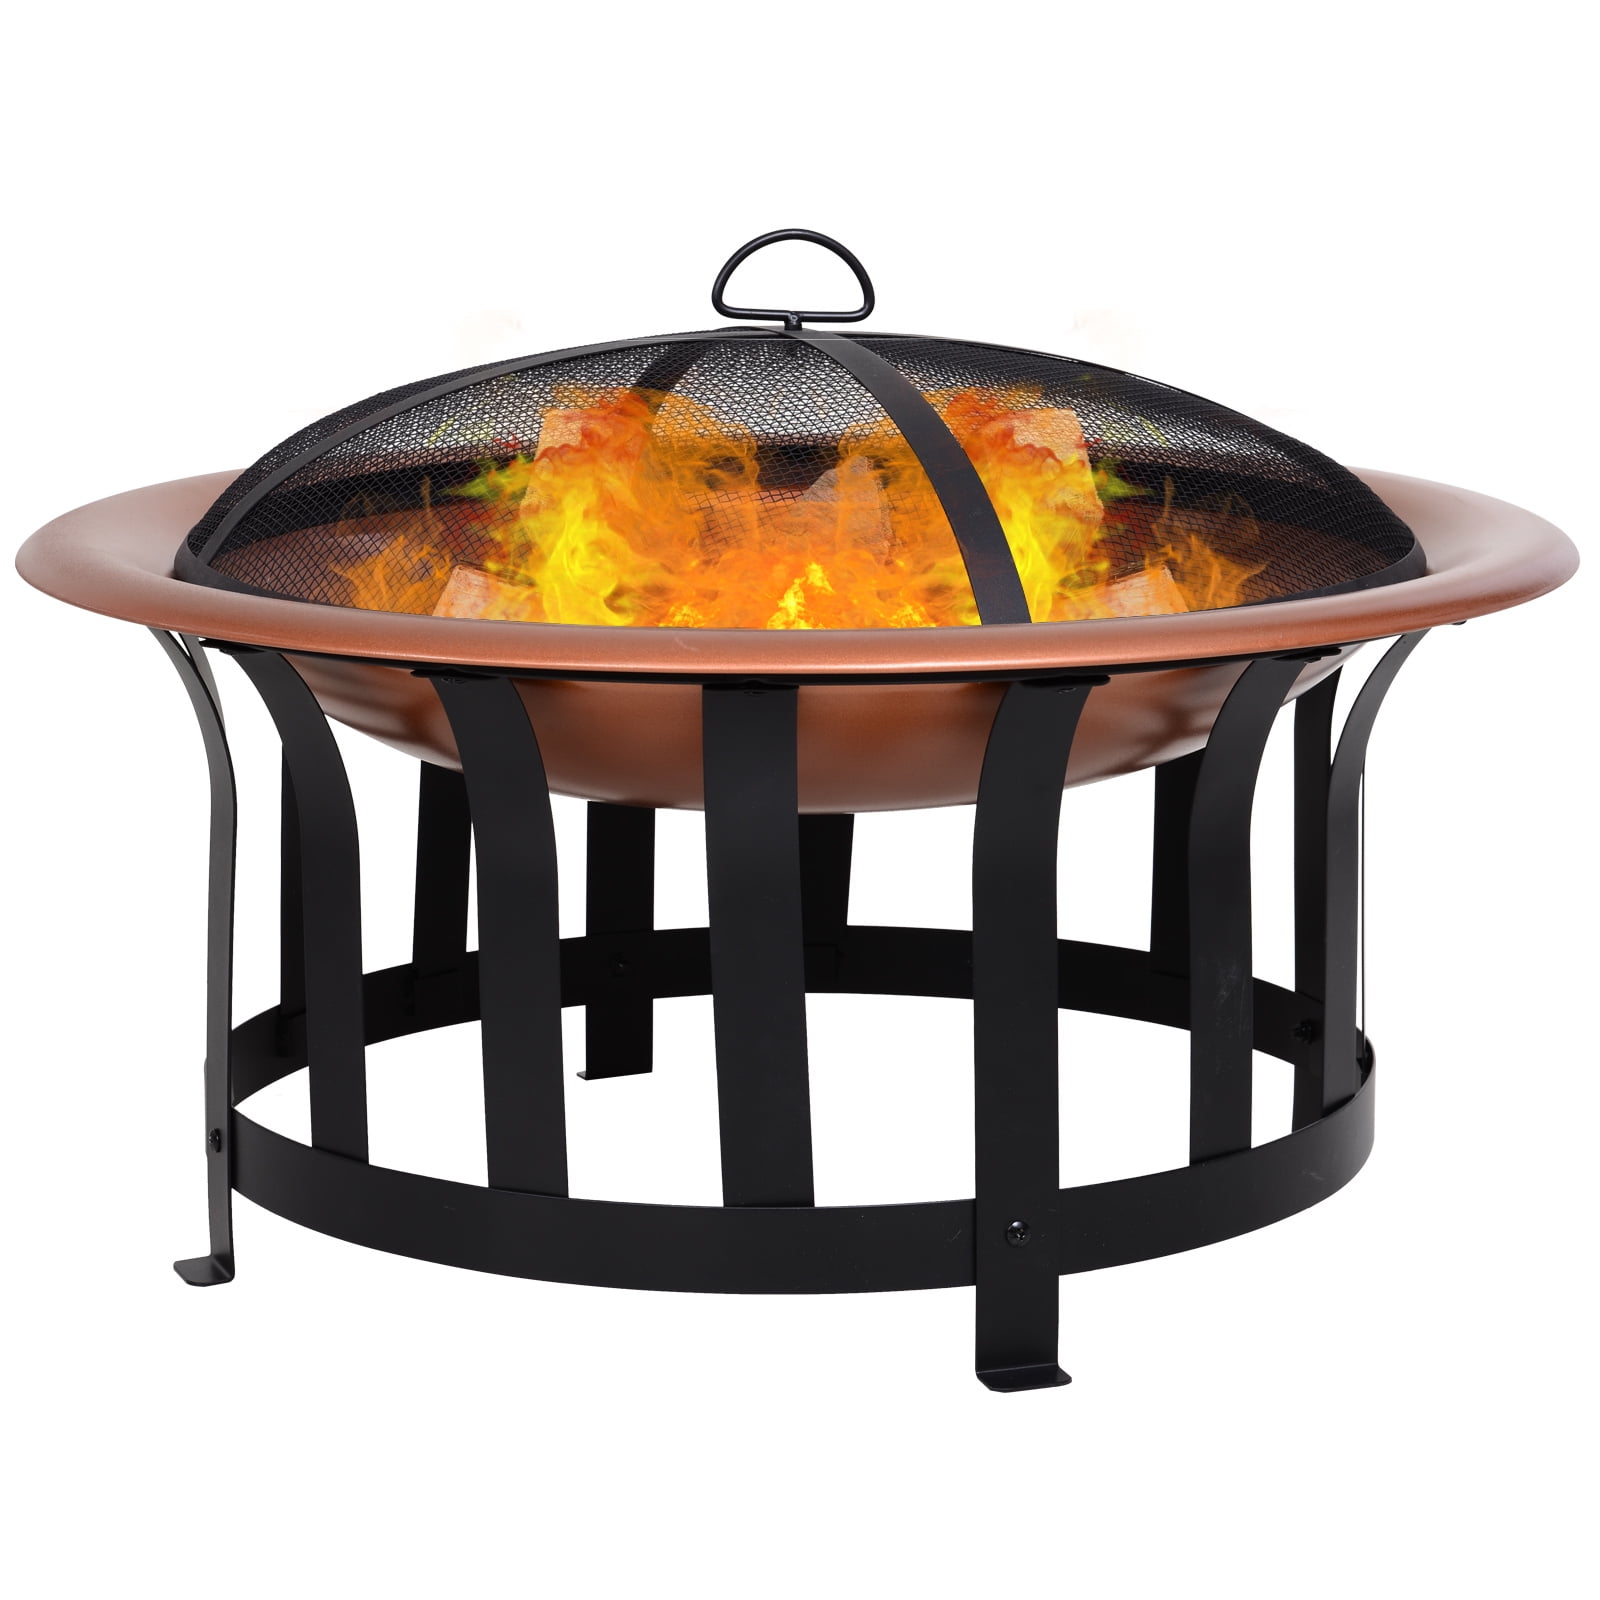 Outsunny Copper Colored Round Metal, Metal Base For Fire Pit